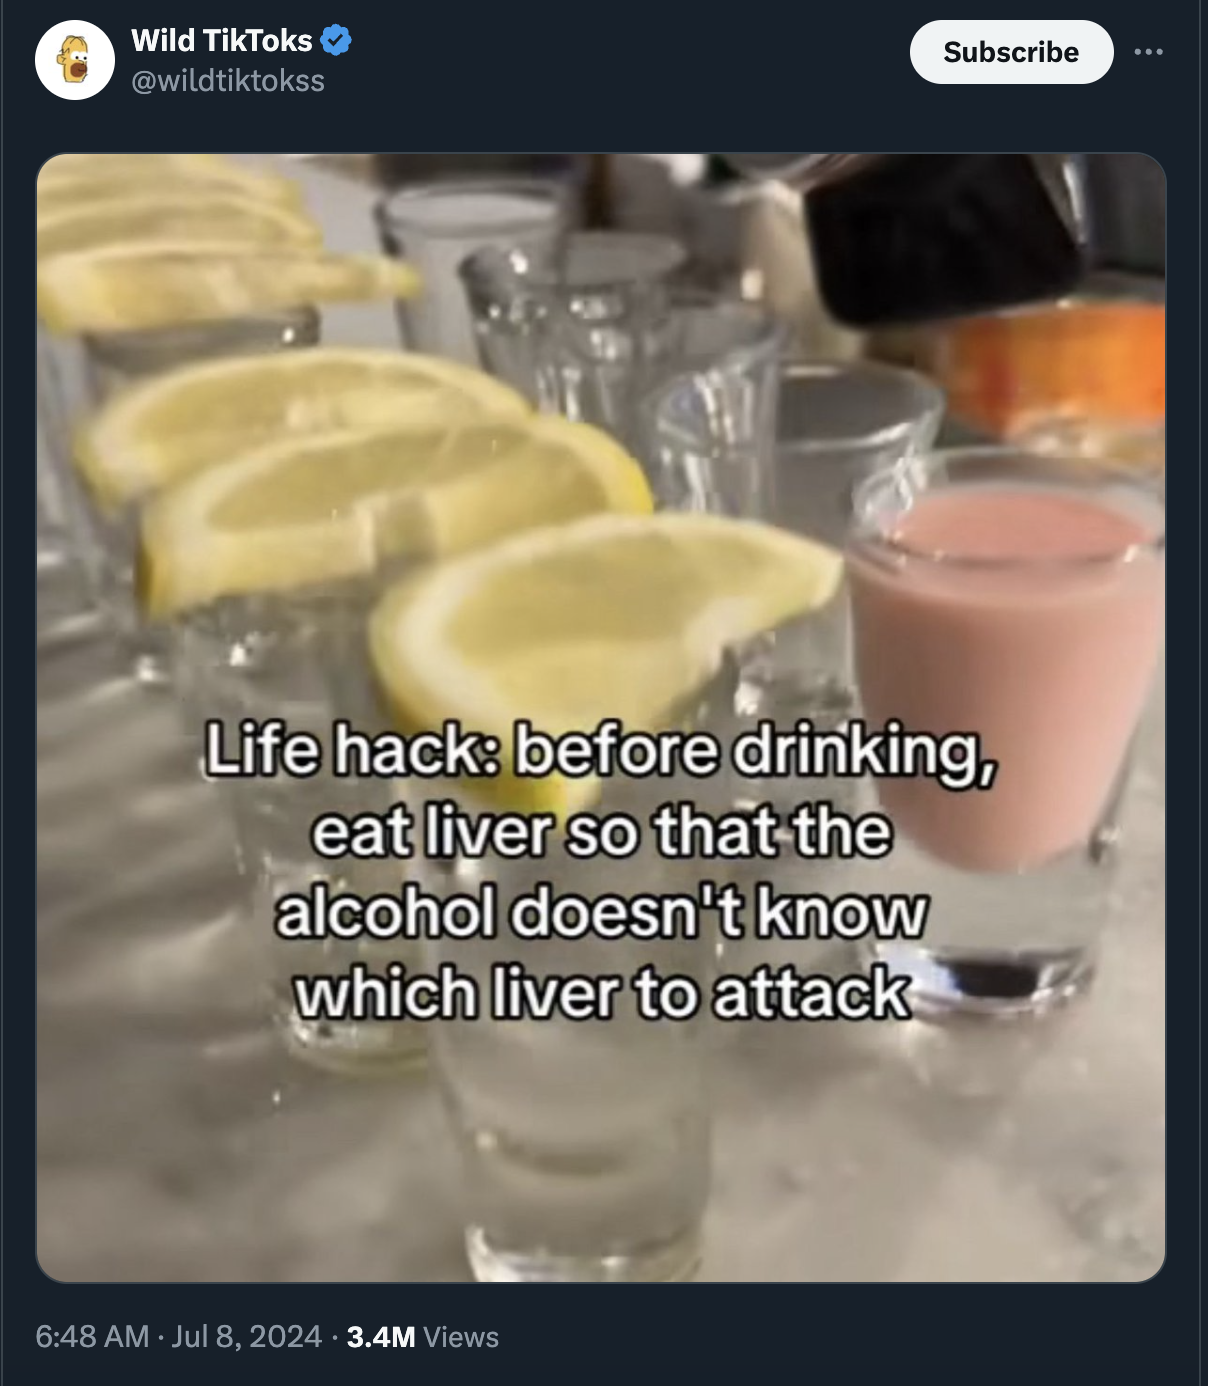 batida - Wild TikToks wildtiktokss Subscribe Life hack before drinking, eat liver so that the alcohol doesn't know which liver to attack 3.4M Views